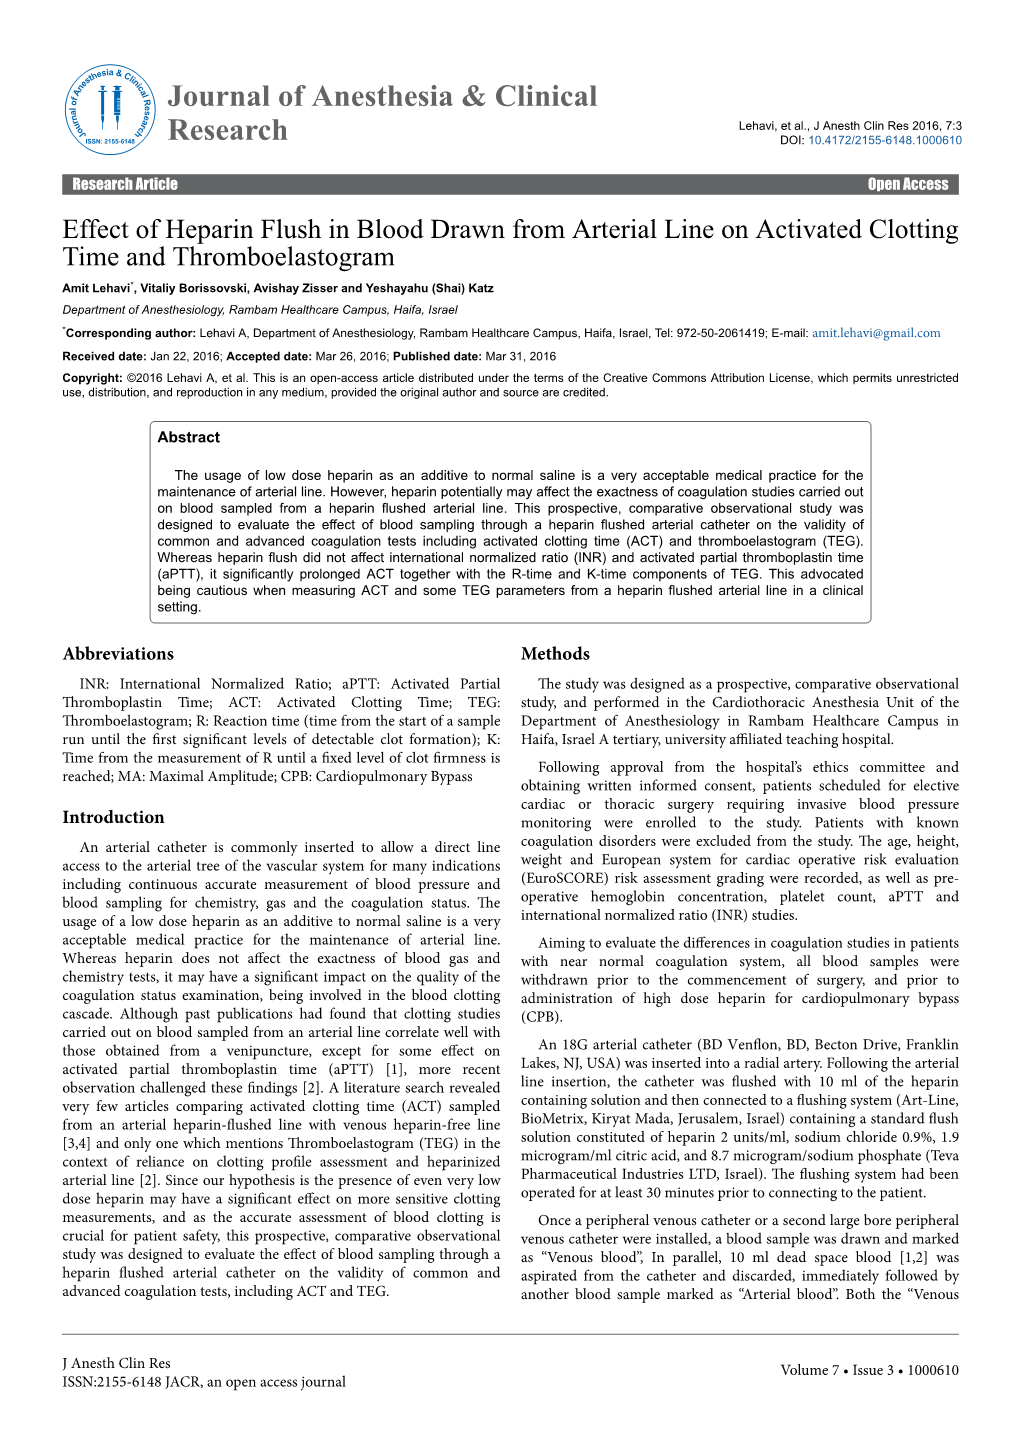 Effect of Heparin Flush in Blood Drawn from Arterial Line On